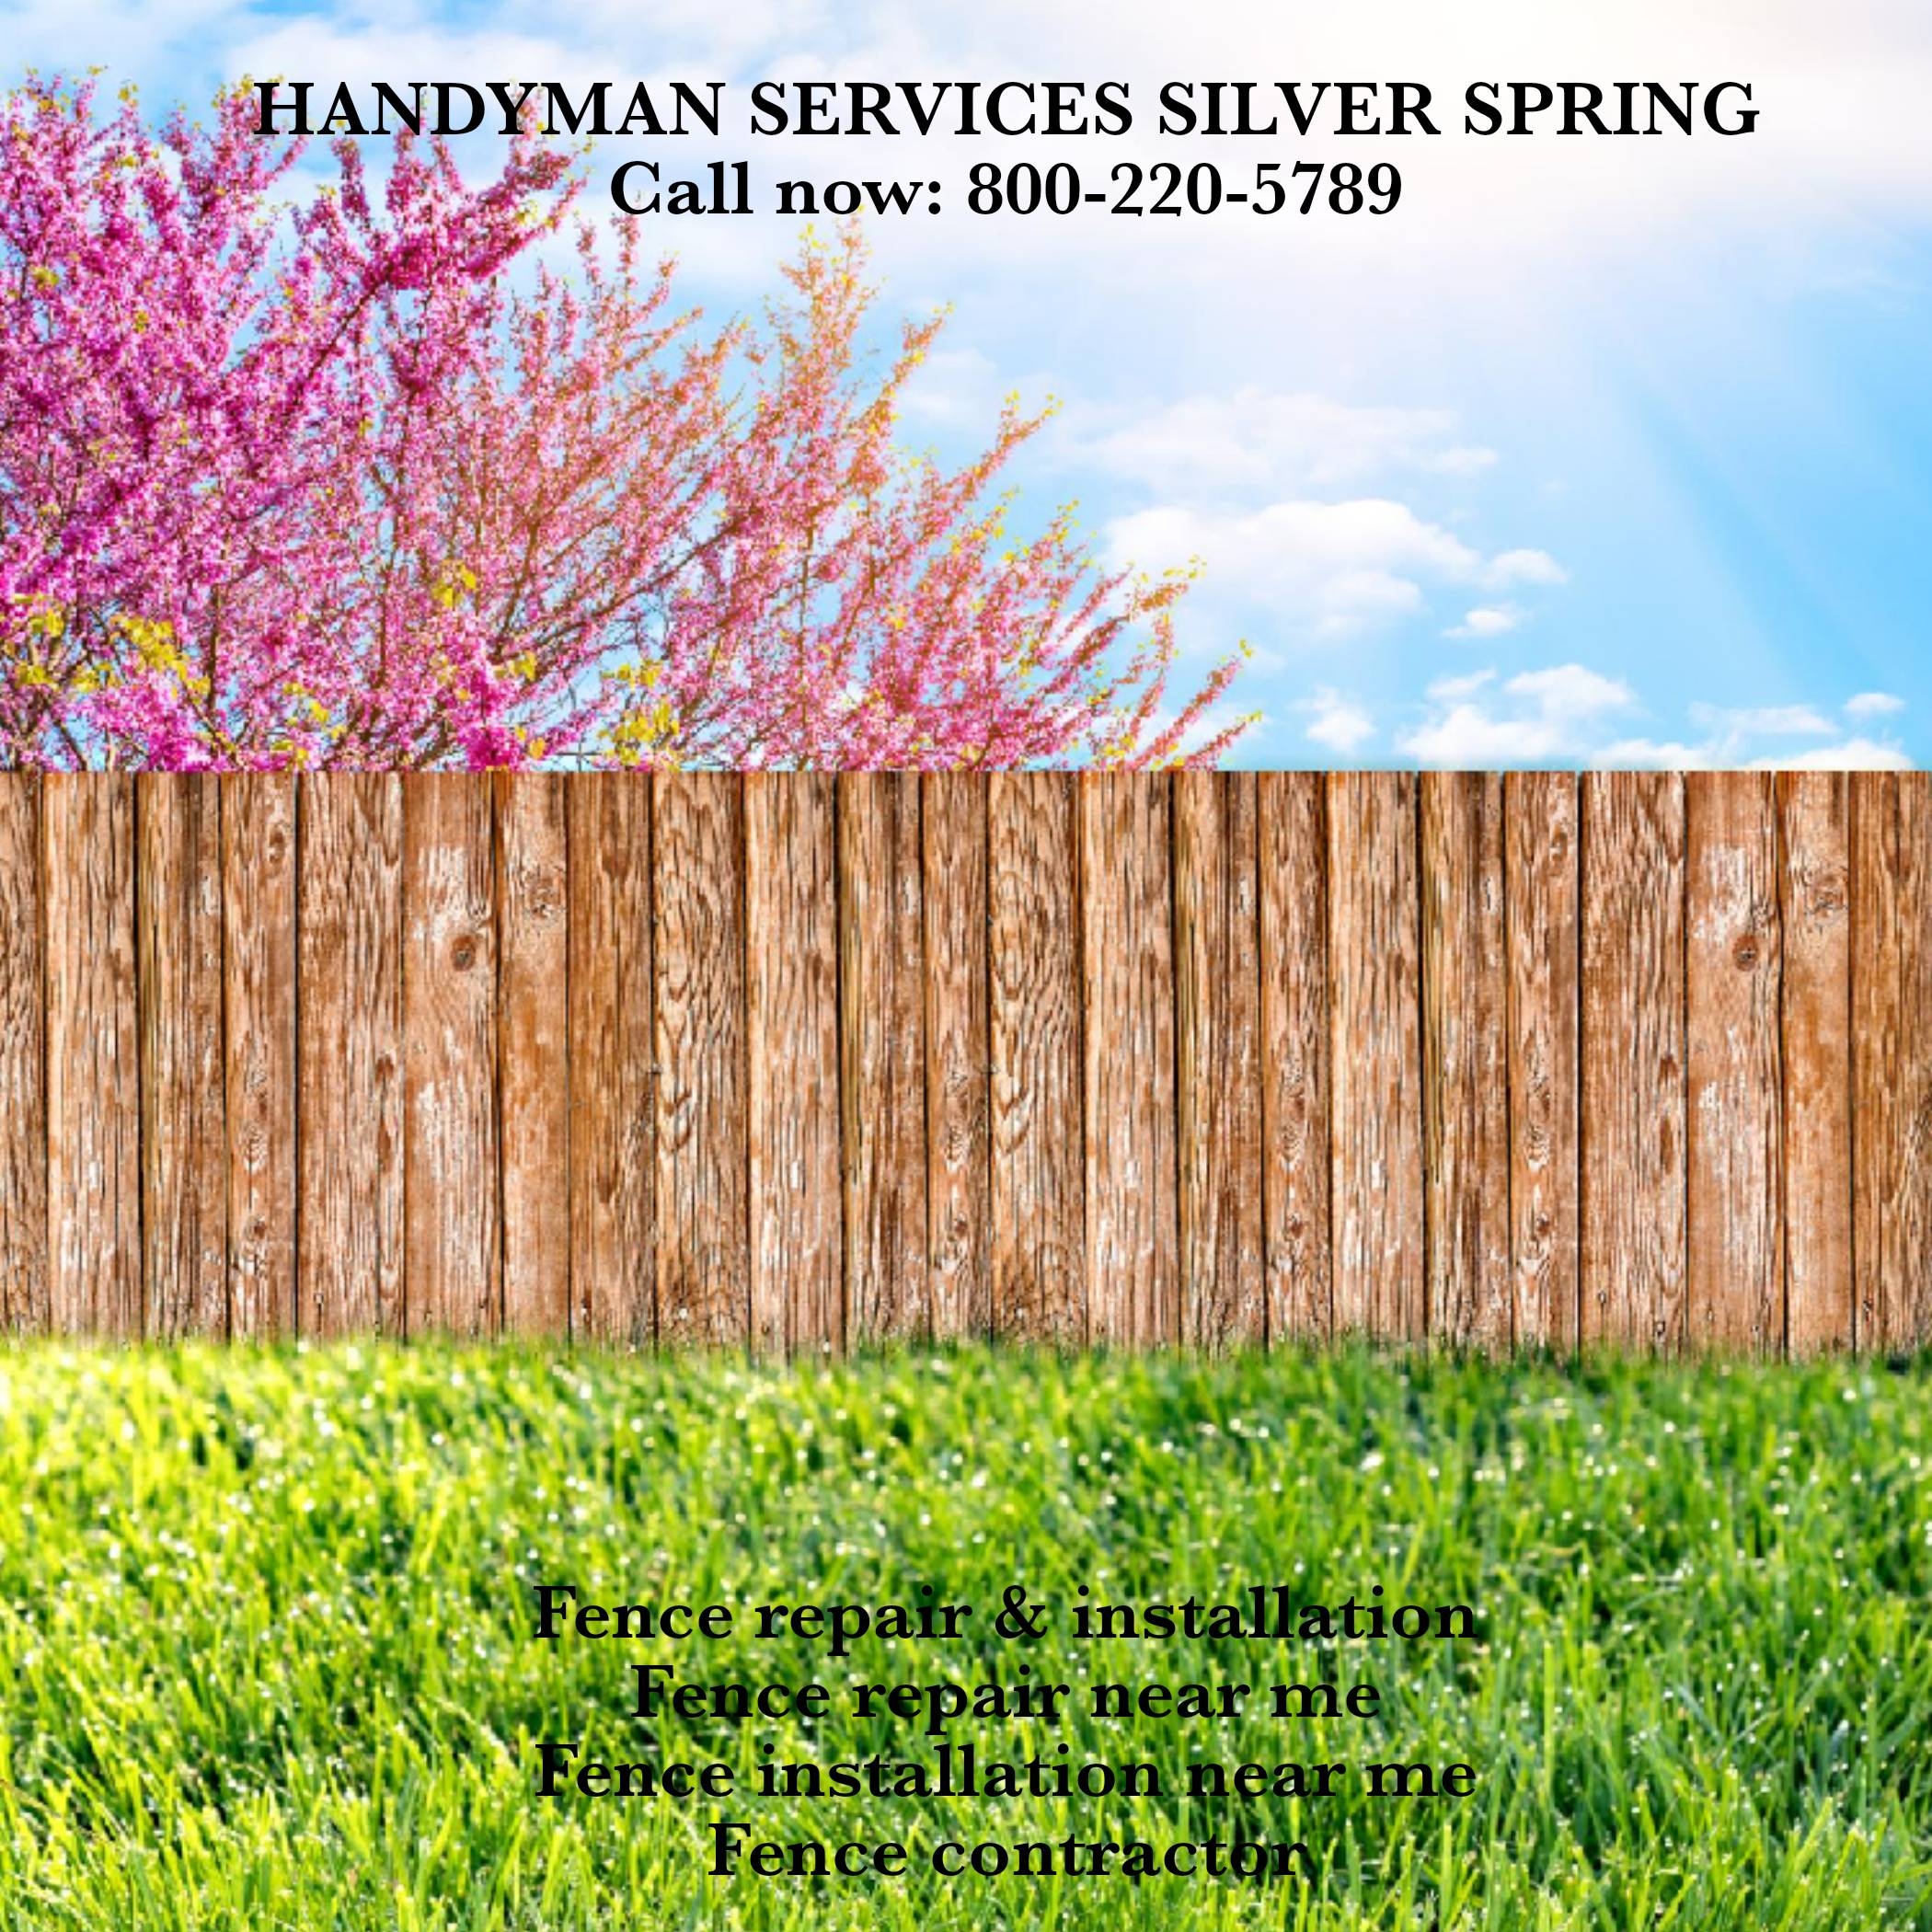 Protecting Your Fence: How to Rescue Fencing from Wind Damage